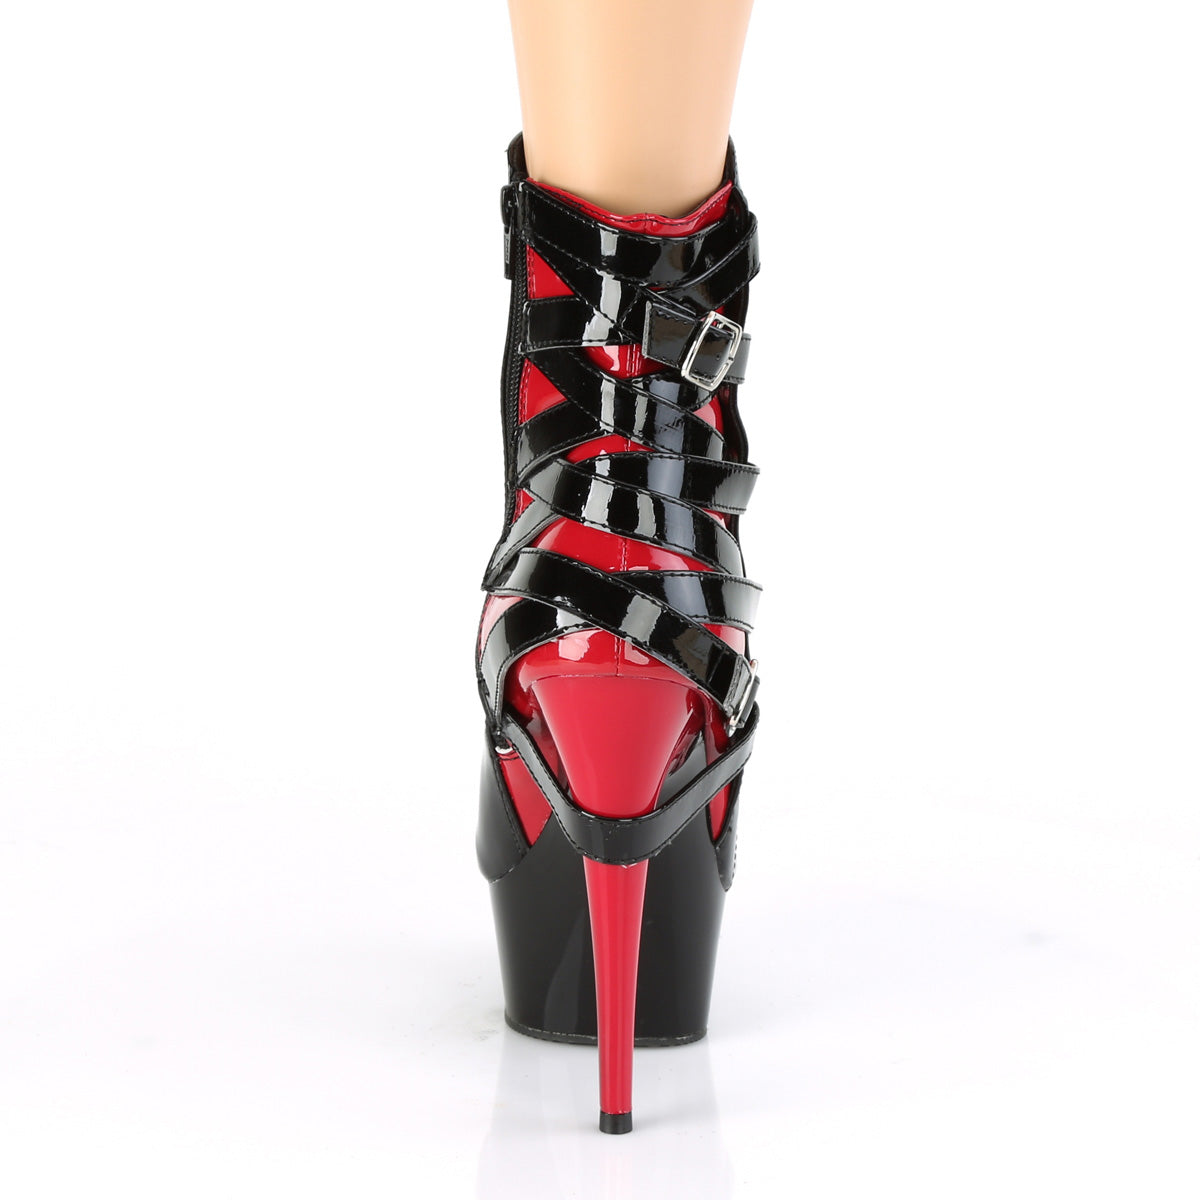 DELIGHT-1012 6" Heel Black and Red Pole Dancing Platforms-Pleaser- Sexy Shoes Fetish Footwear